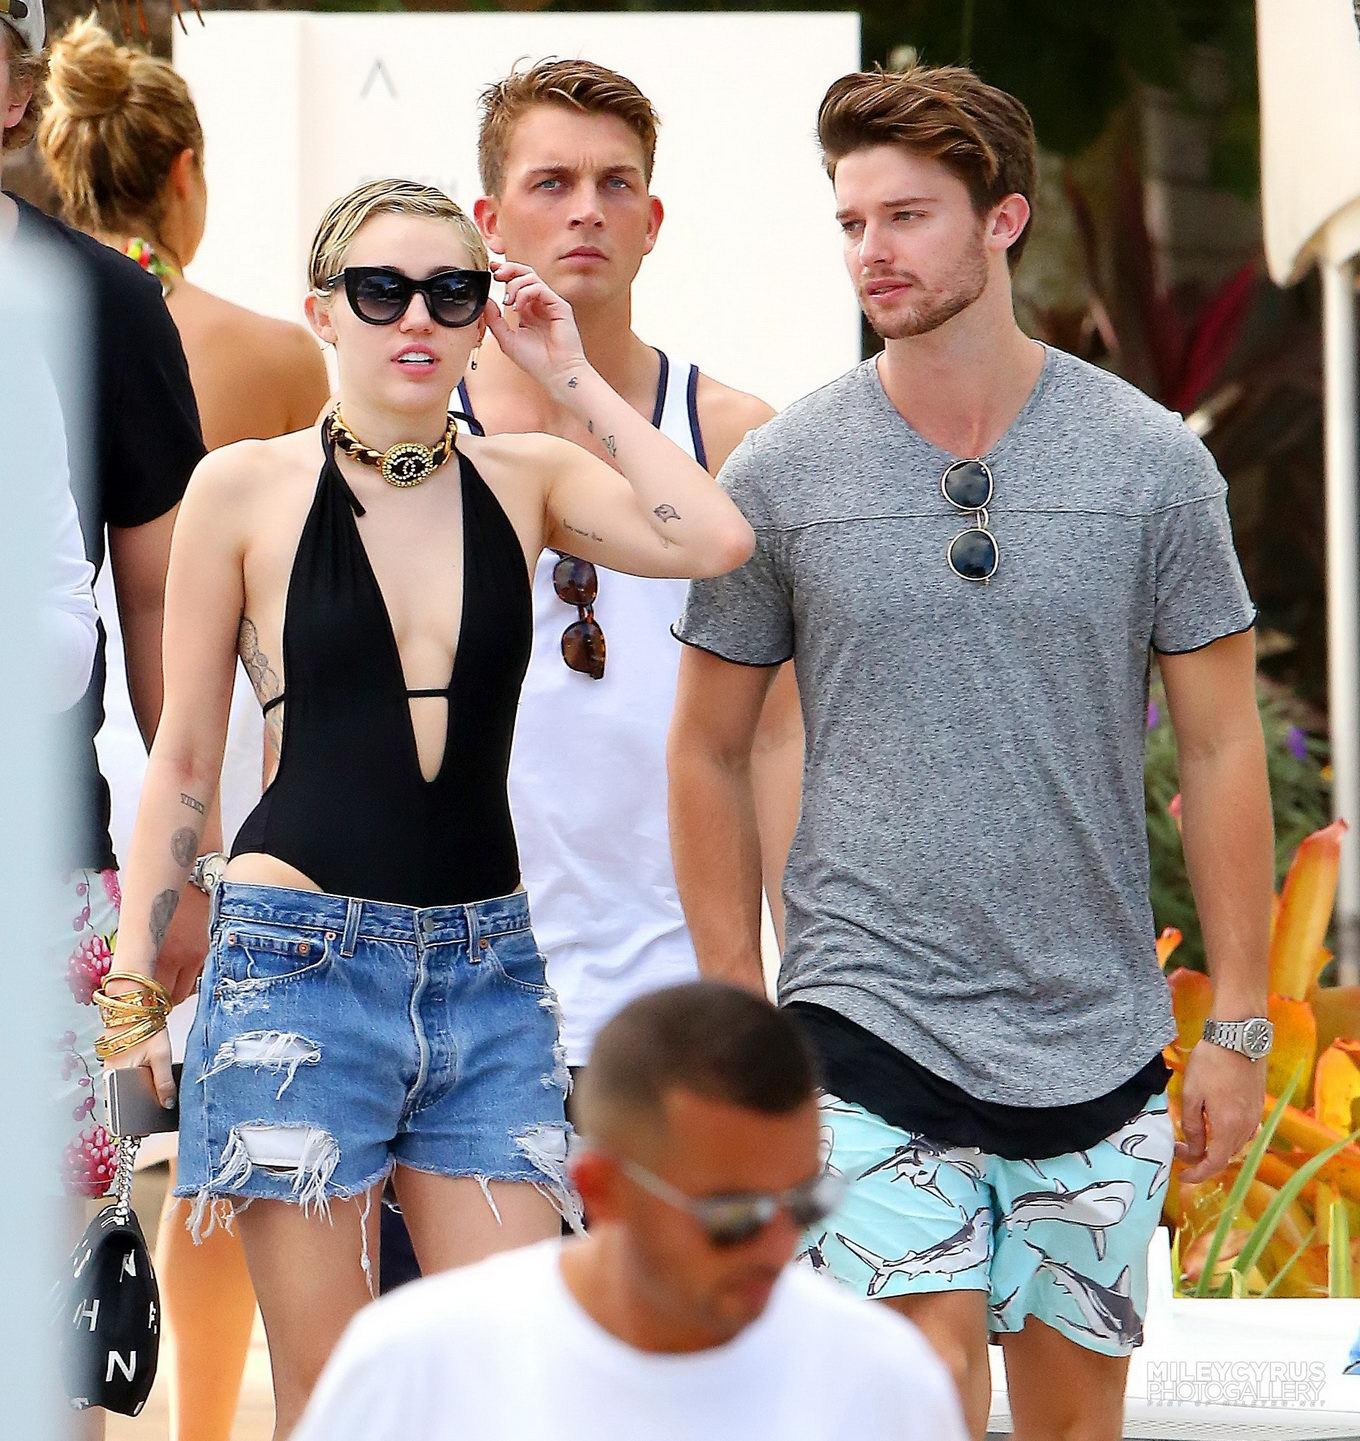 Miley Cyrus wearing swimsuit and hotpants at a pool in Miami #75178803